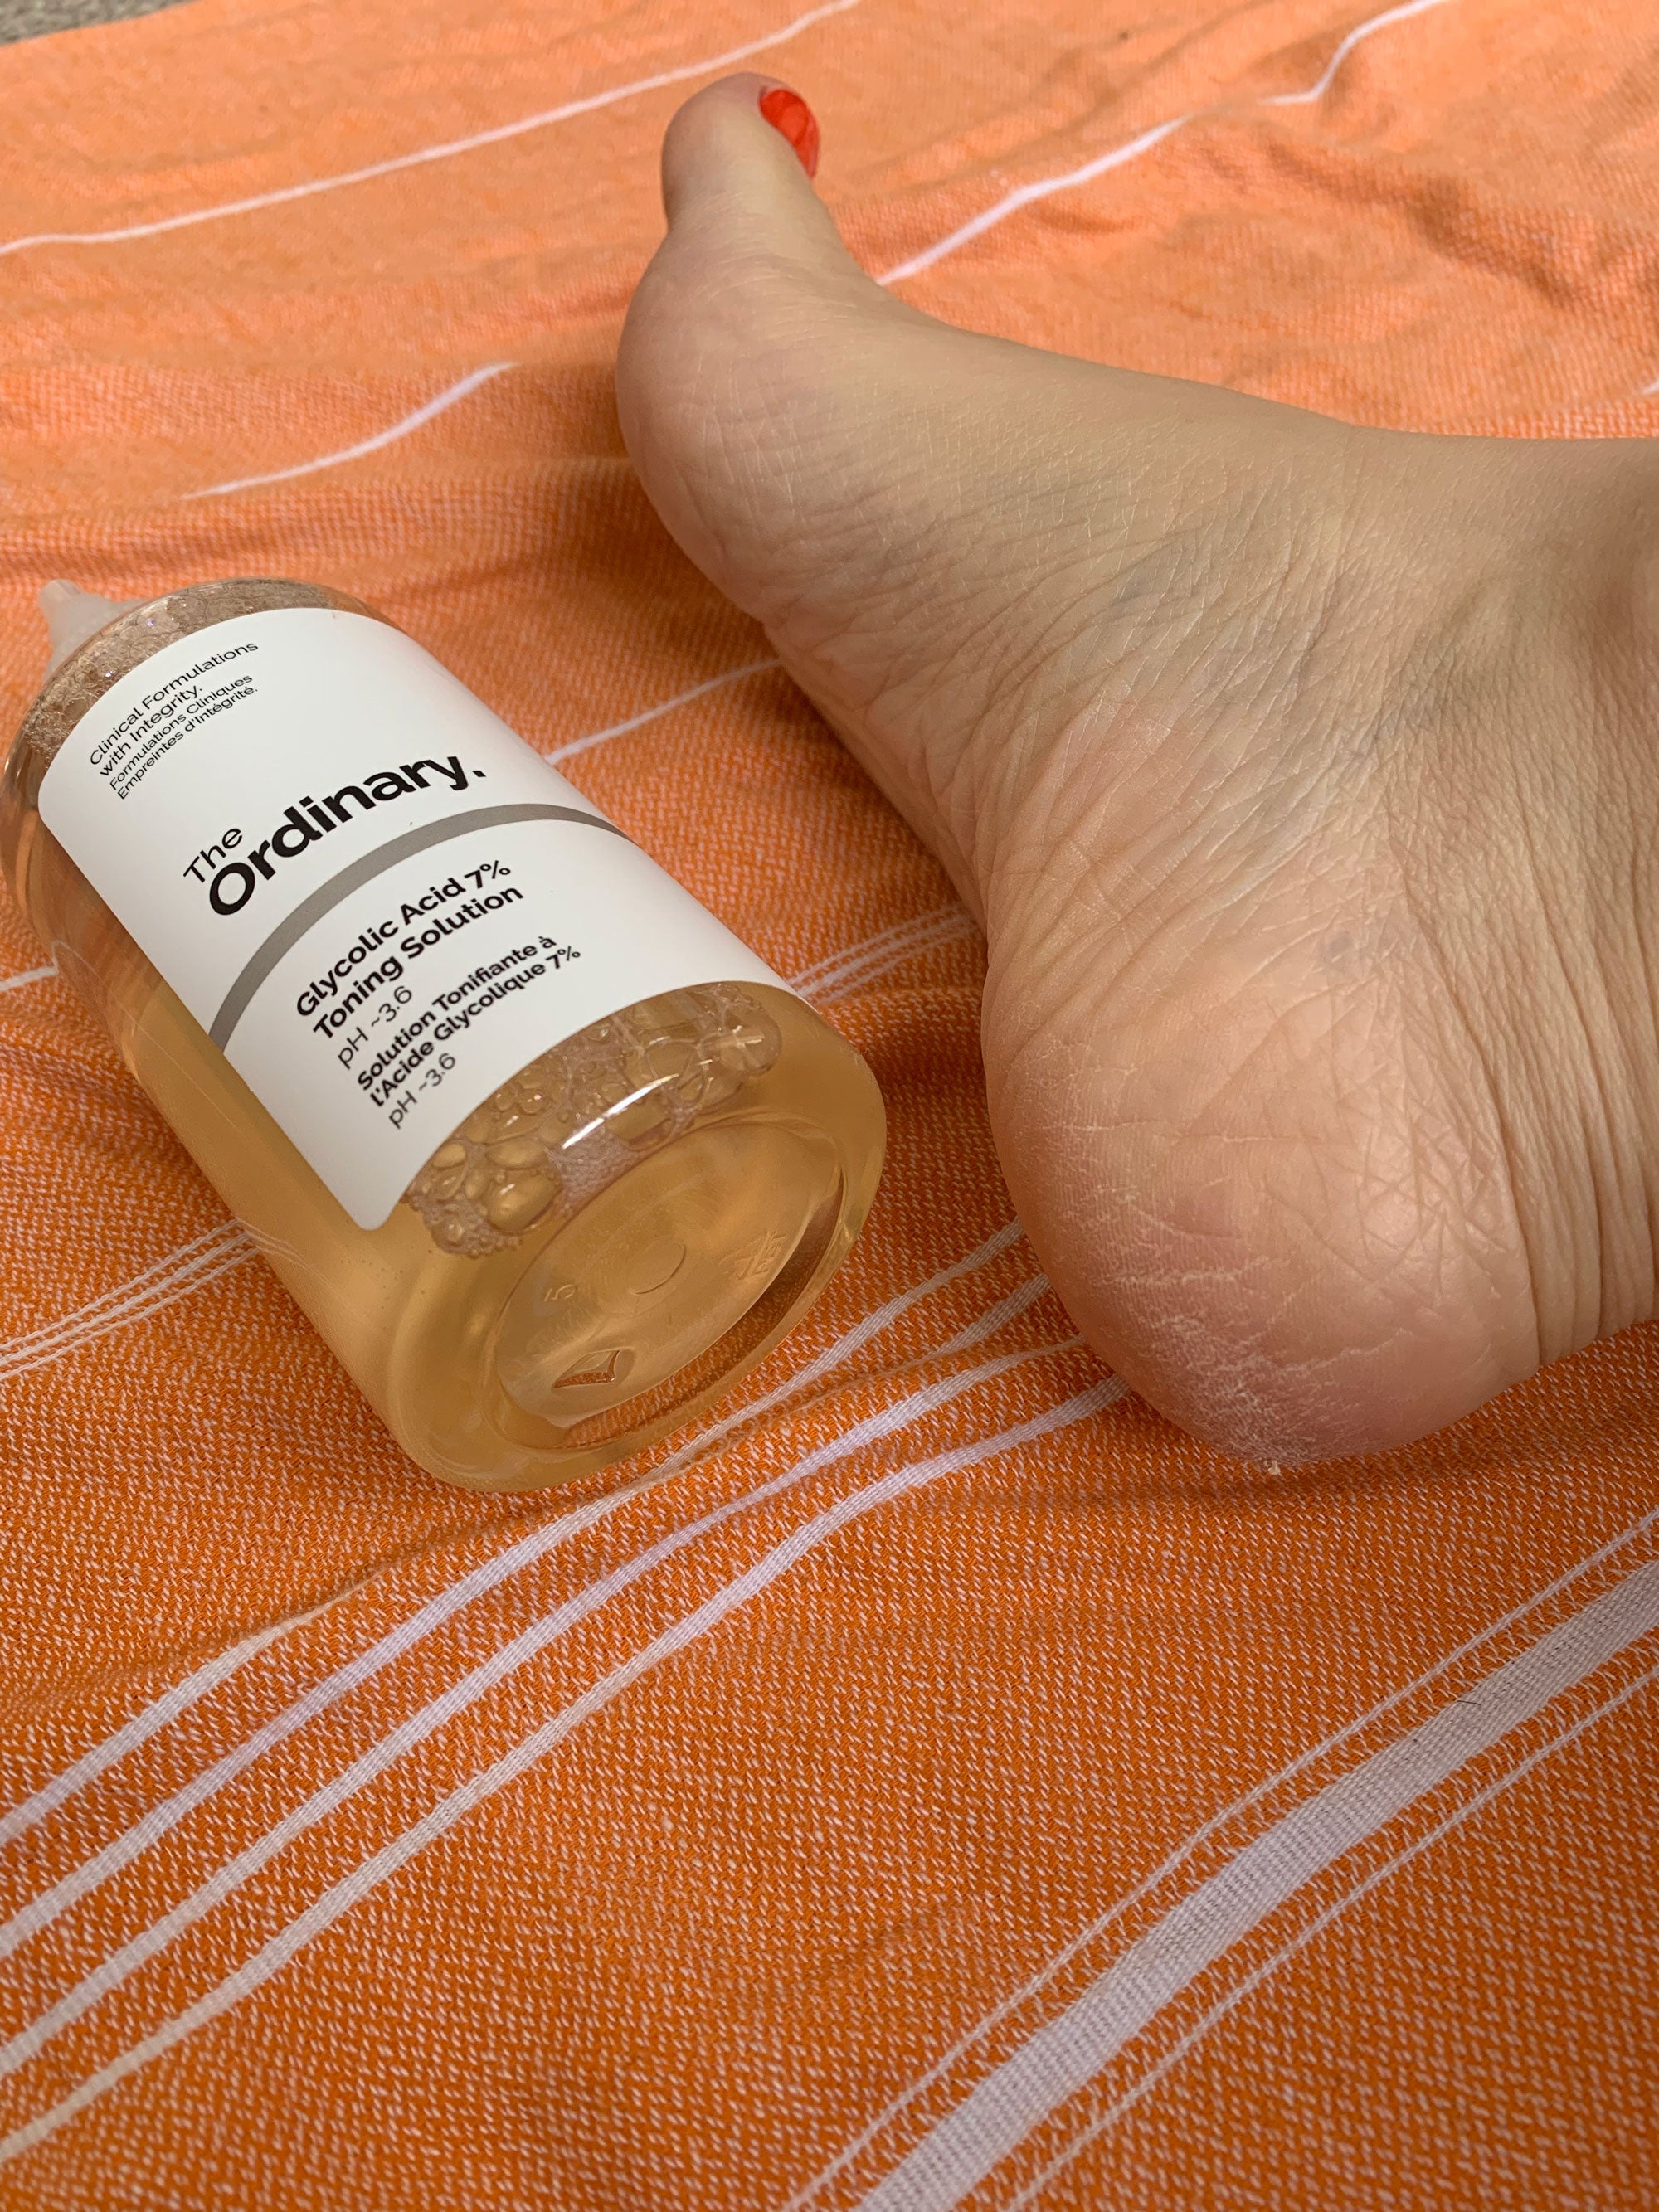 How to heal cracked heels - Mayo Clinic News Network